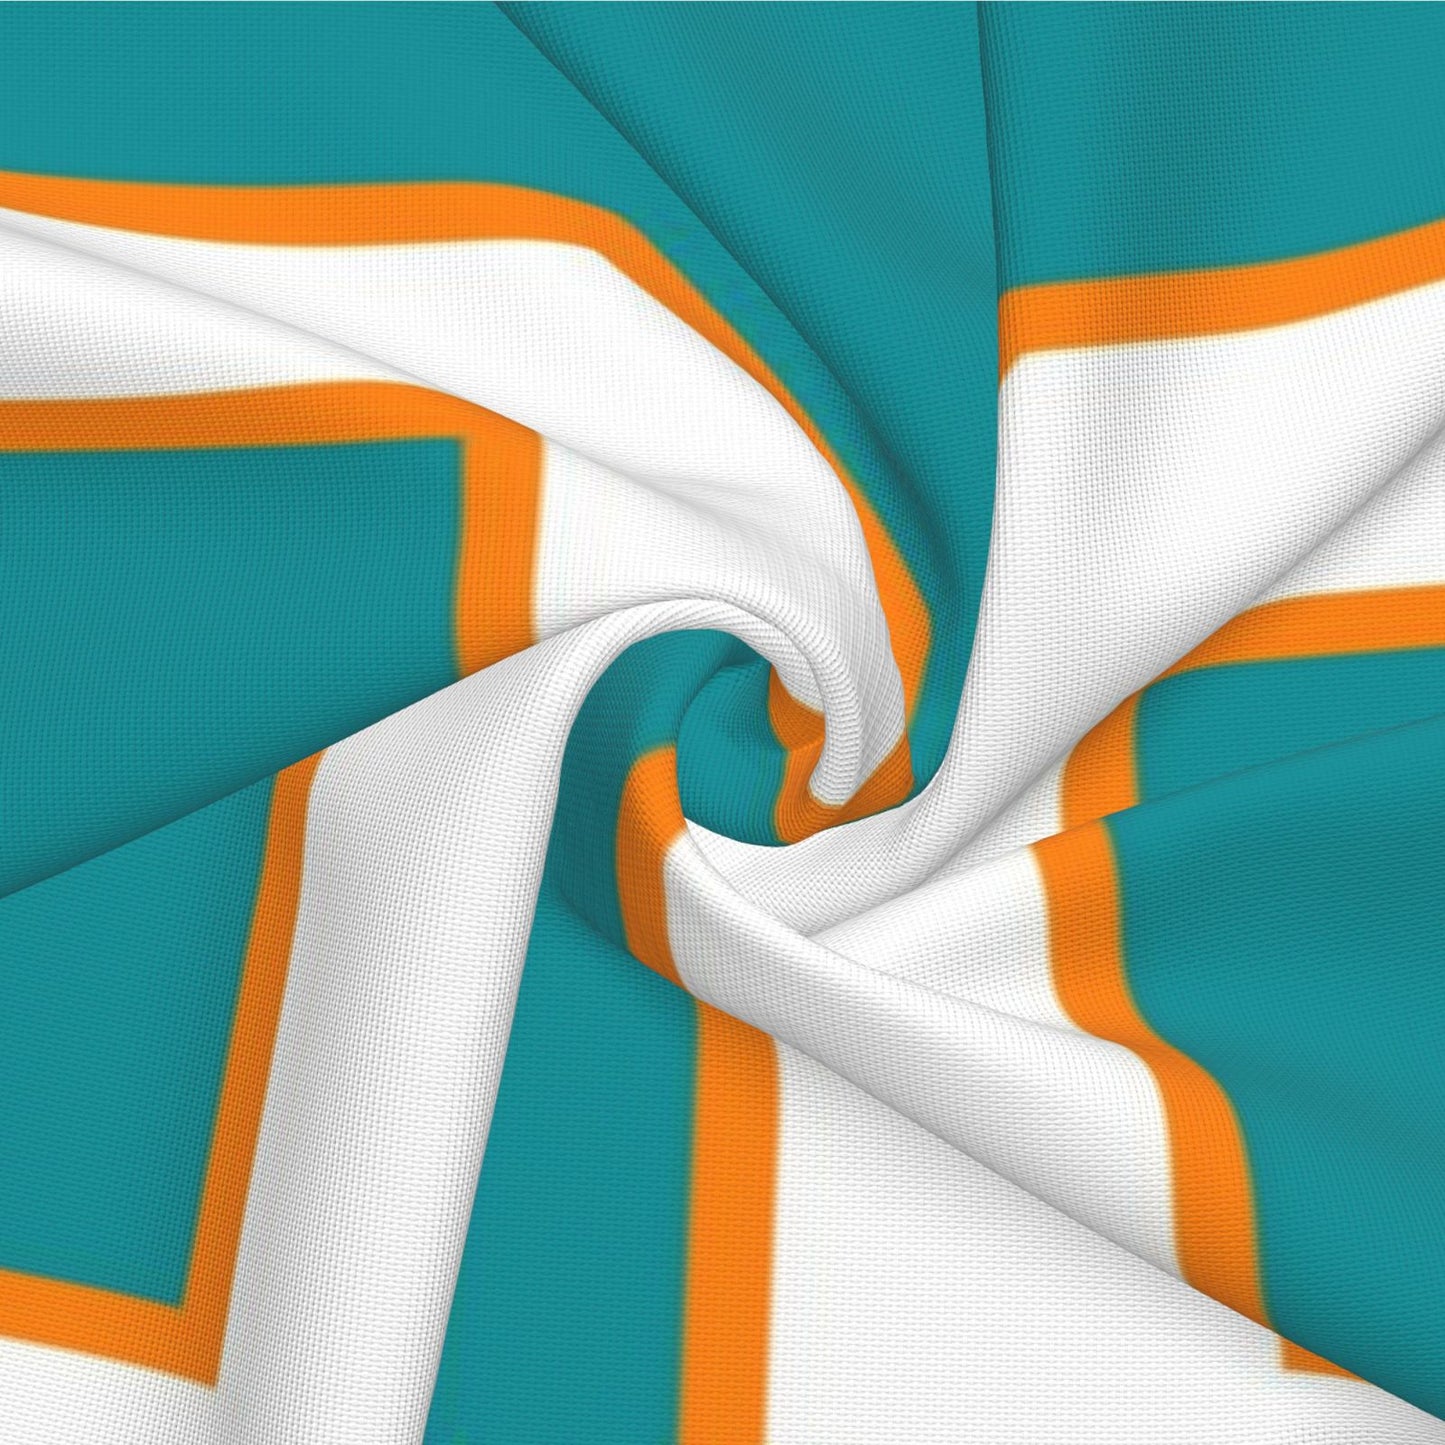 Customized Miami Dolphins Football Team Decorative Throw Pillow Case Print Personalized Football Style Fans Letters & Number Aqua Pillowcase Birthday Gift